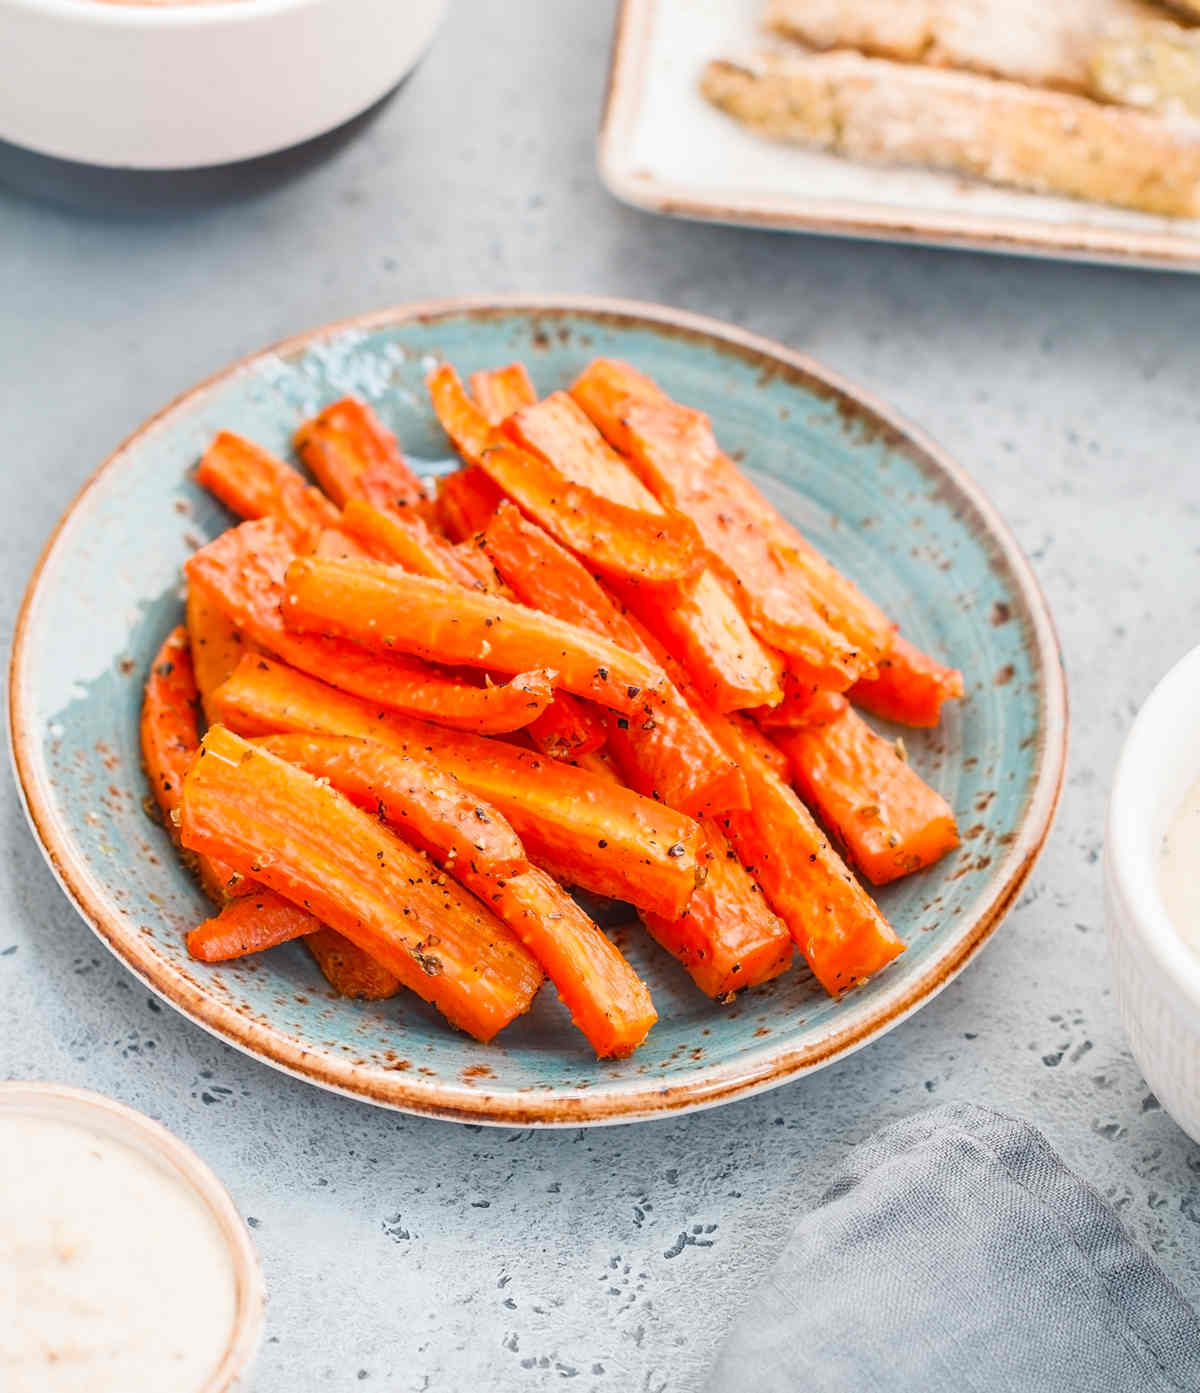 Roasting carrots for baby led weaning.